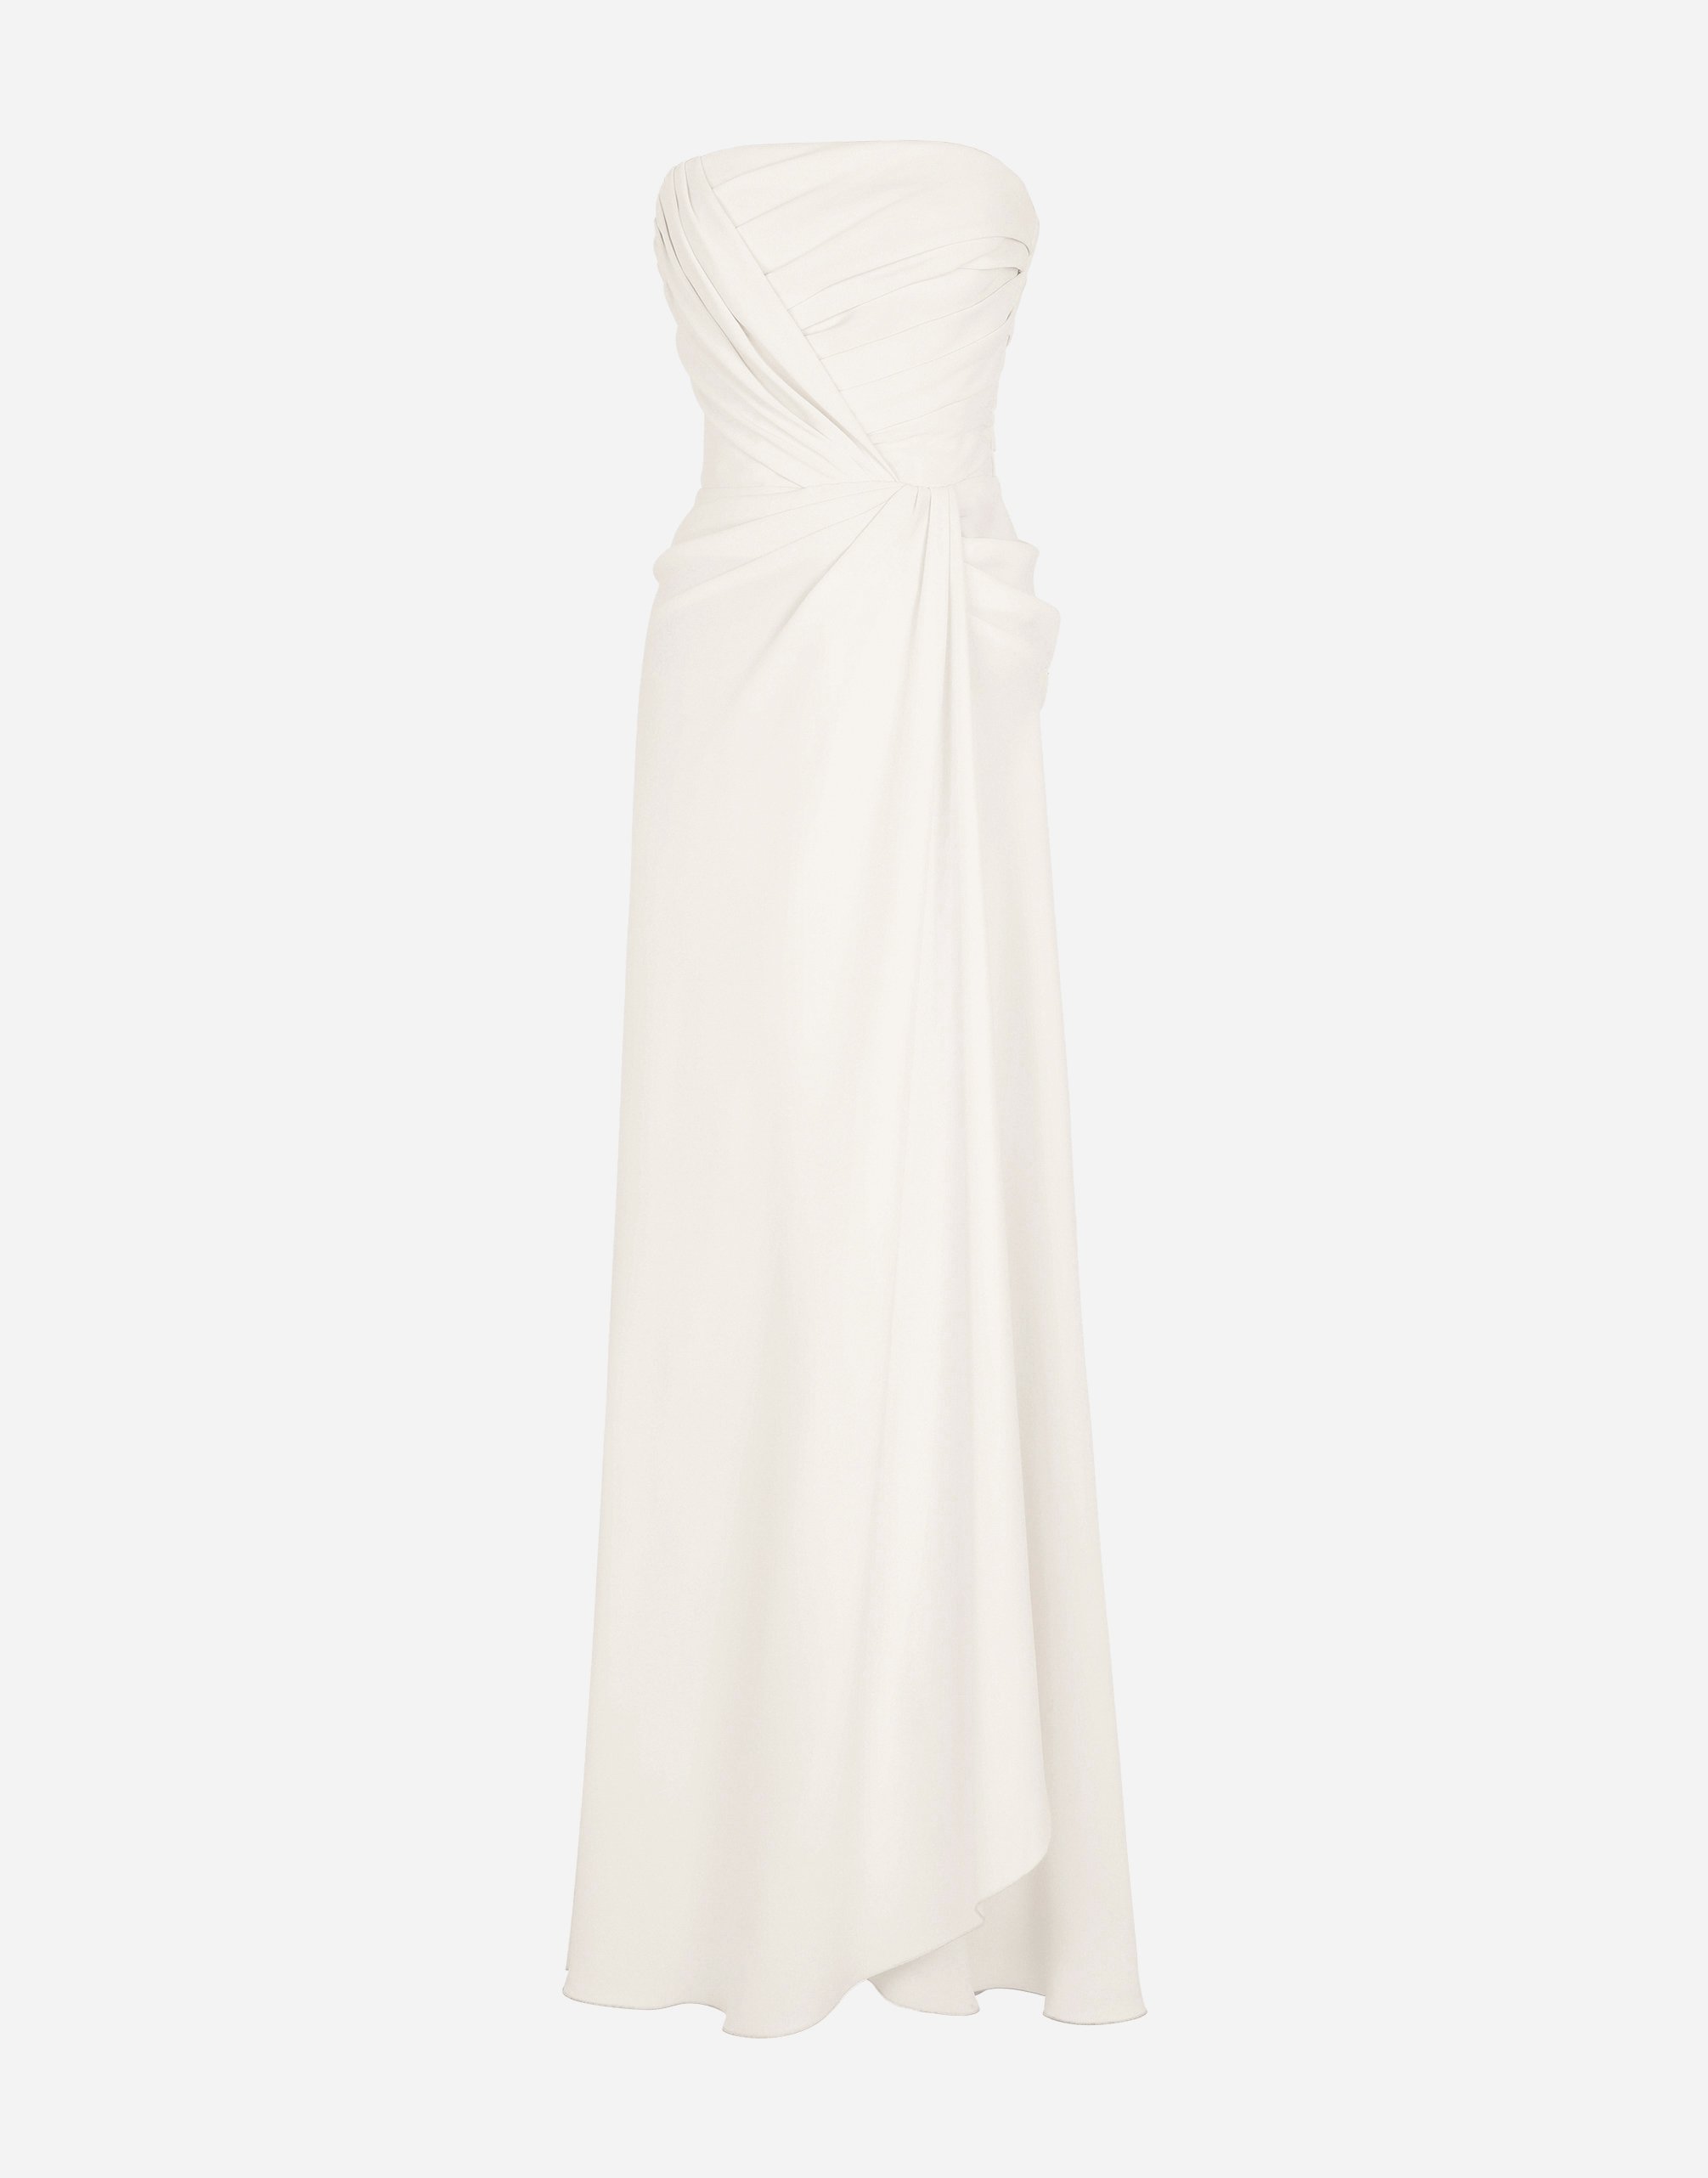 Long sable dress with side slit in White